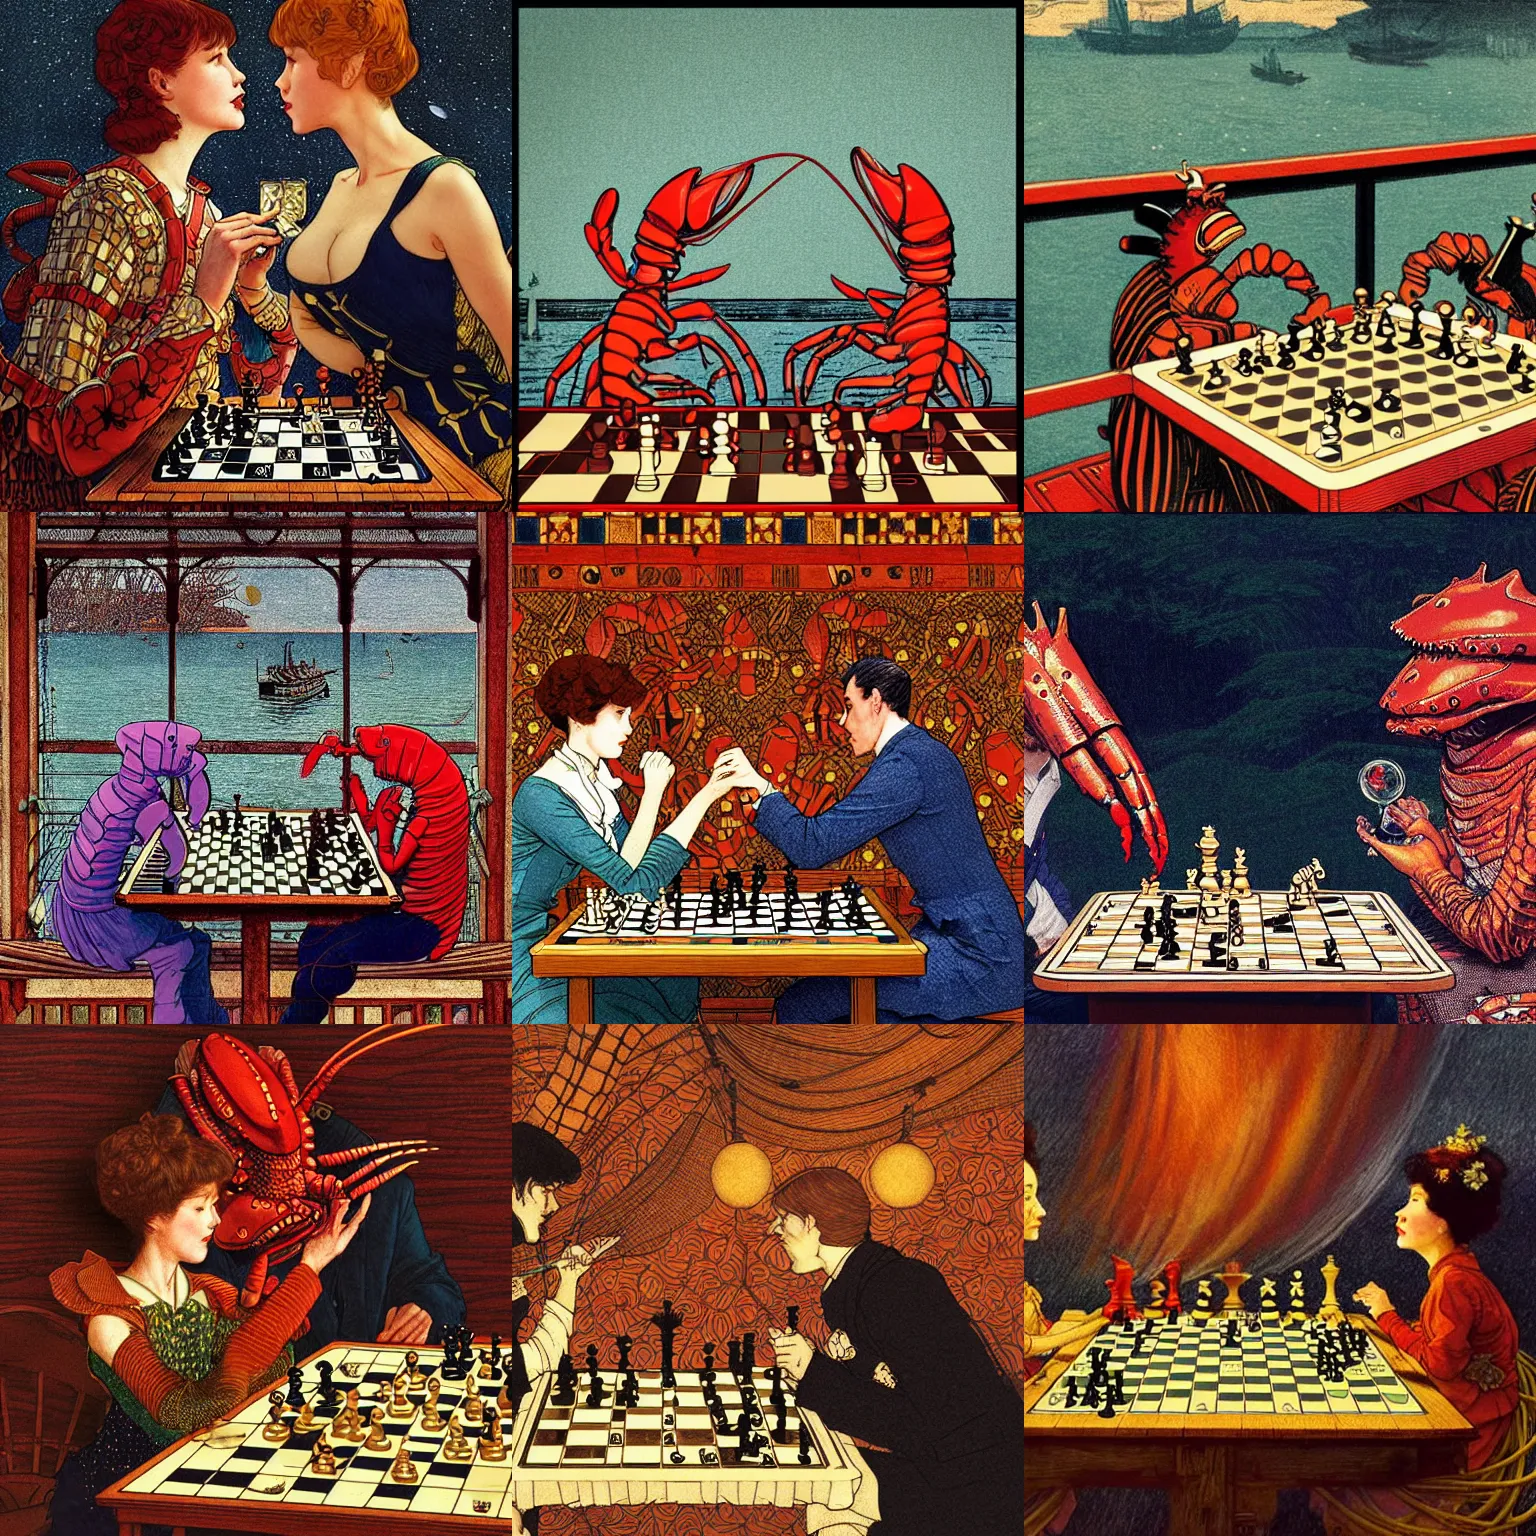 chess boxing in the style of enki bilal, Stable Diffusion